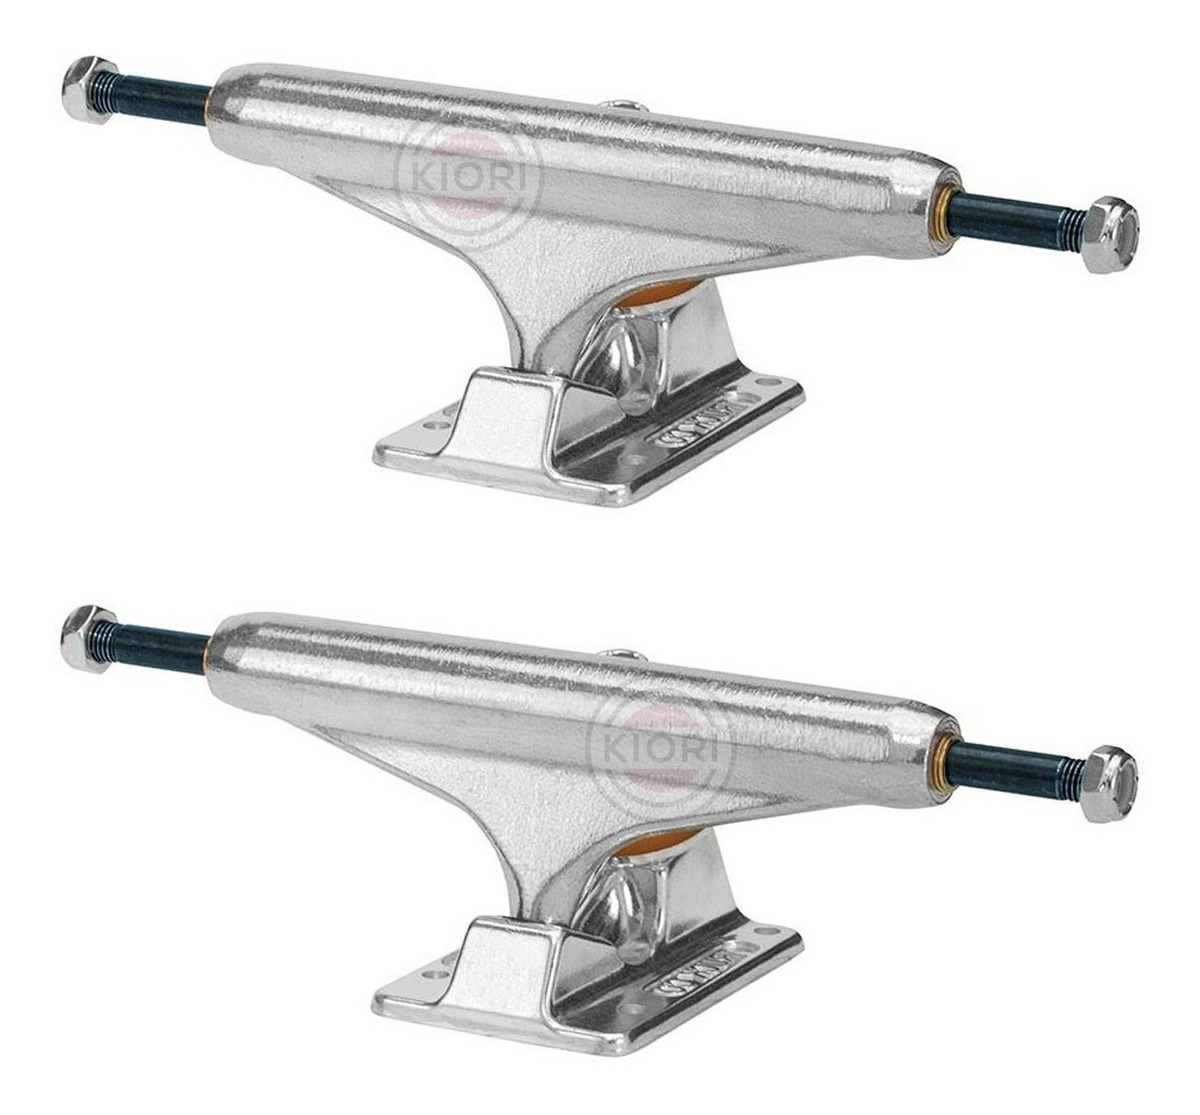 Truck Independent Stage11 - 139mm, 149mm, 159mm E 169mm | Mercado Livre